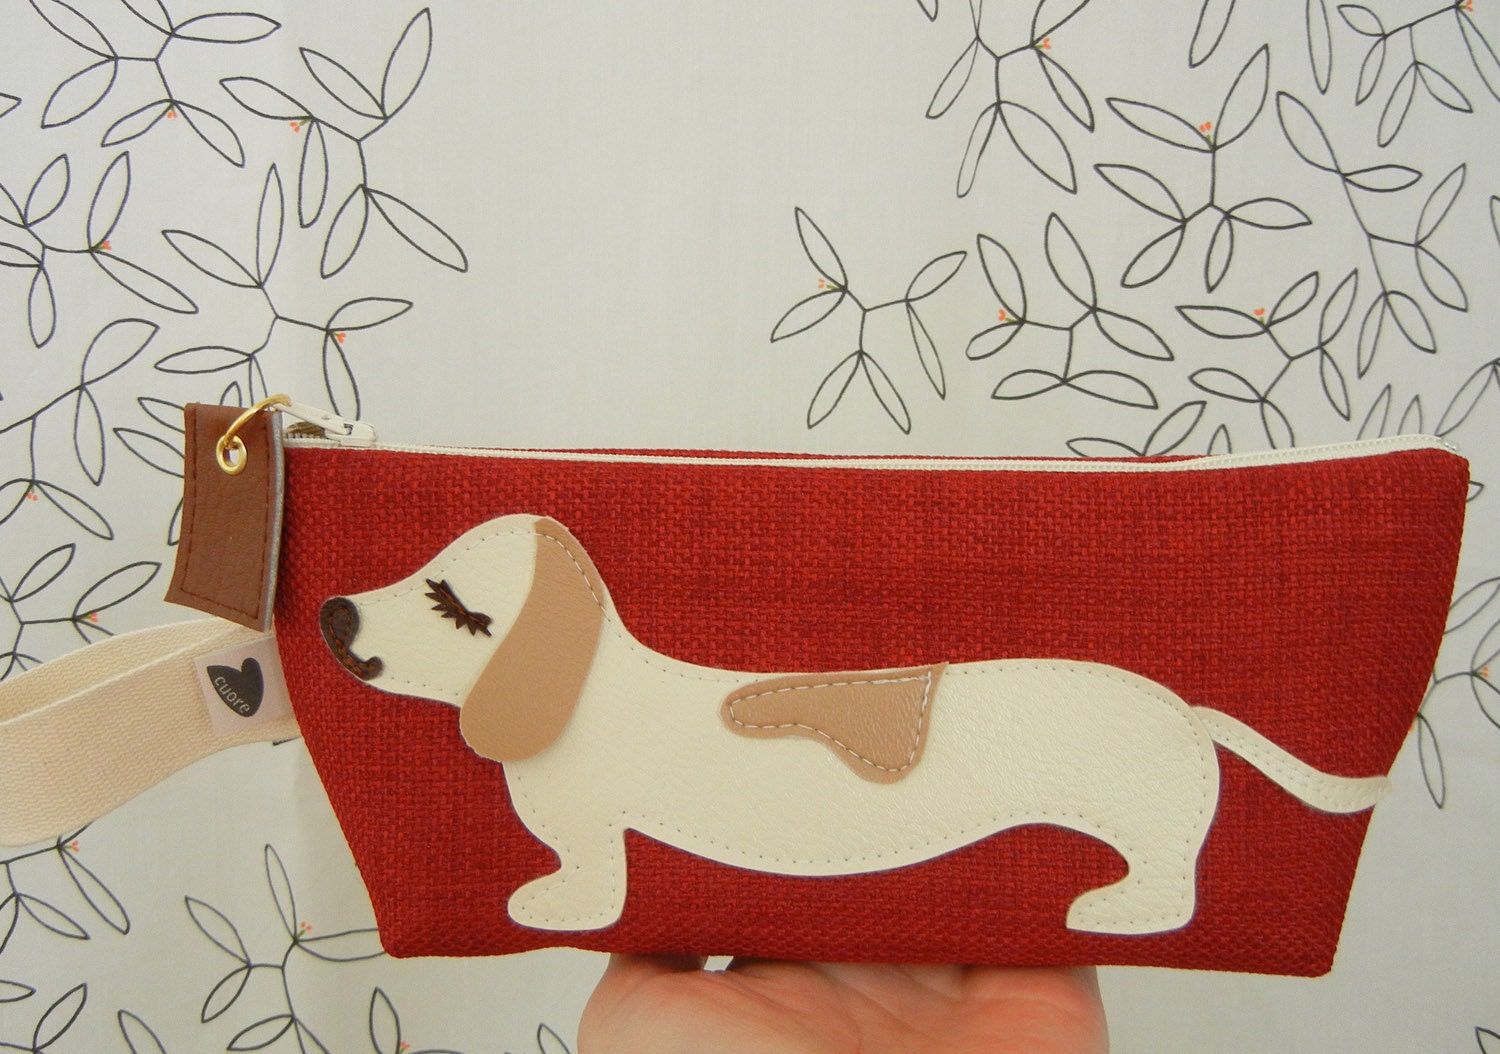 Yang the Dachshund Dog Vintage Red Tweed Cosmetic Carry all Case Zipper Pouch with Vinyl Applique